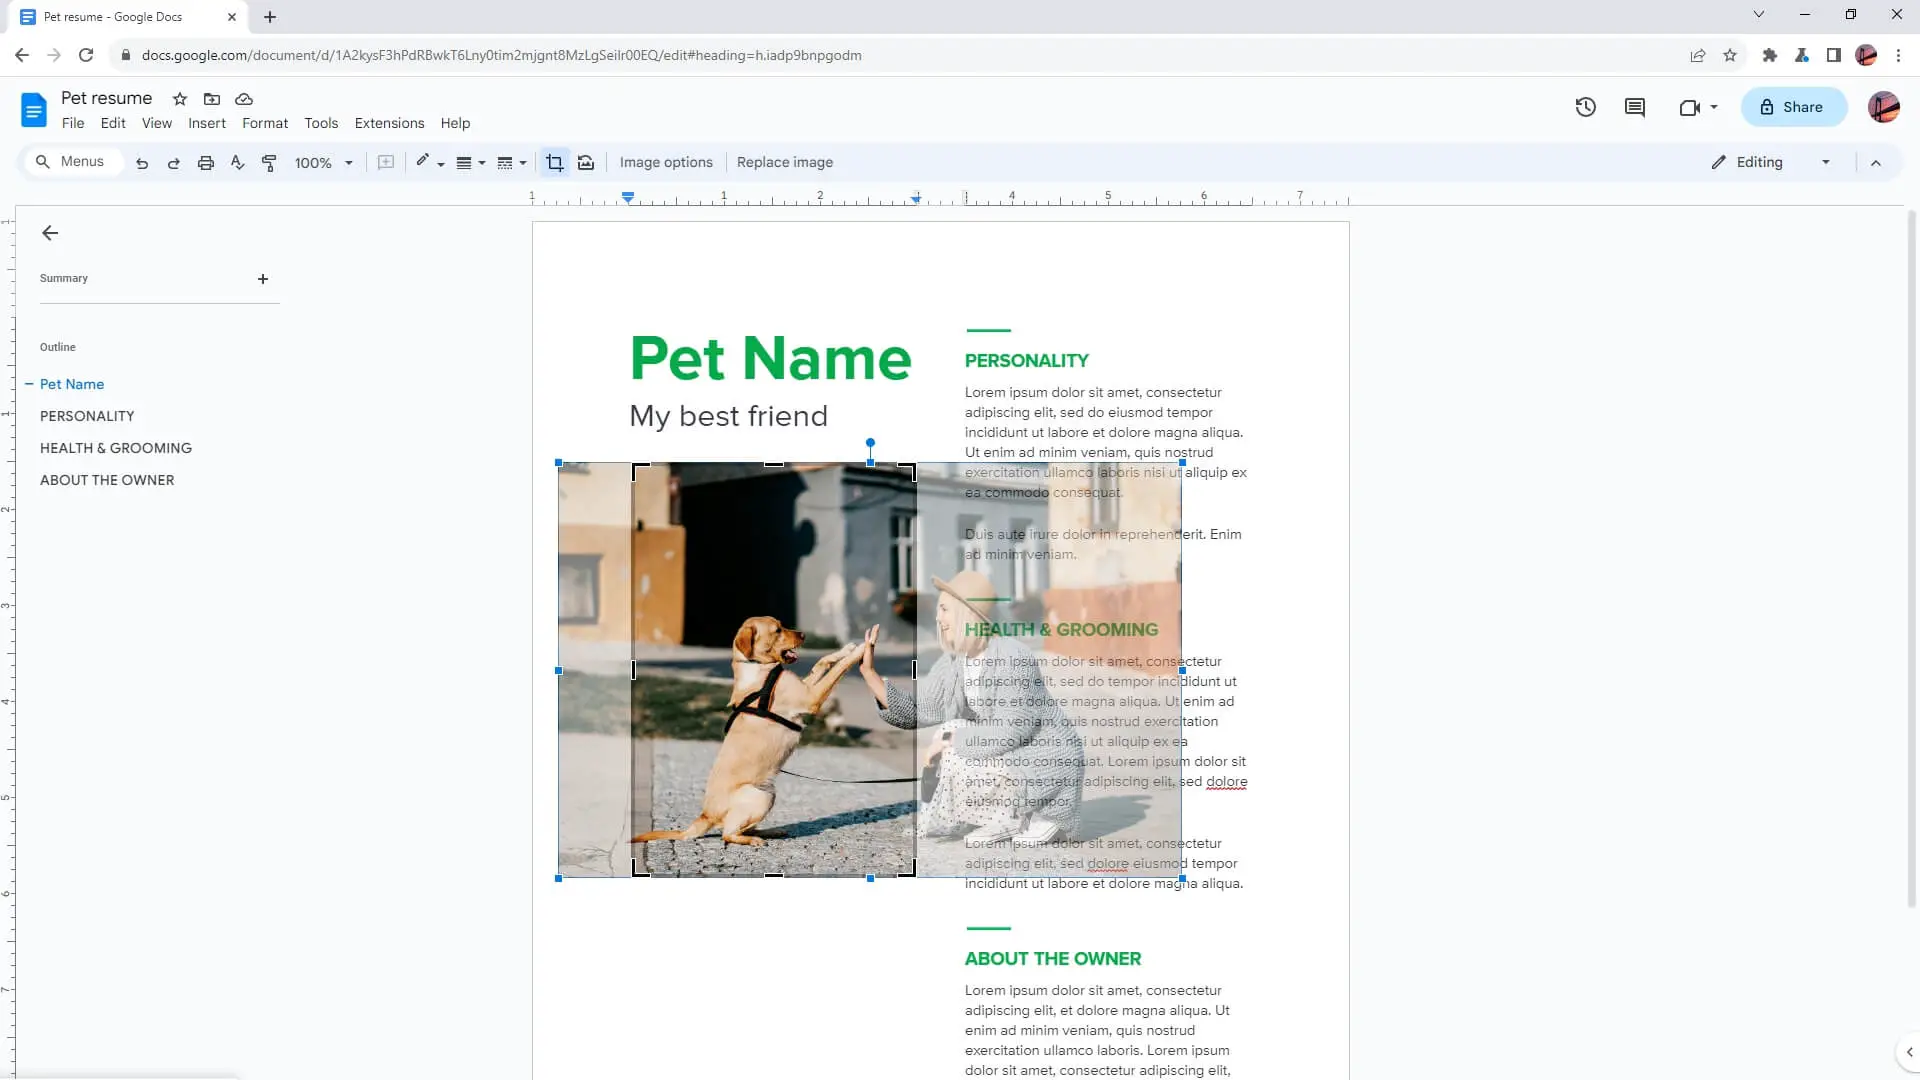 Image 188 How to Crop an Image in Google Docs